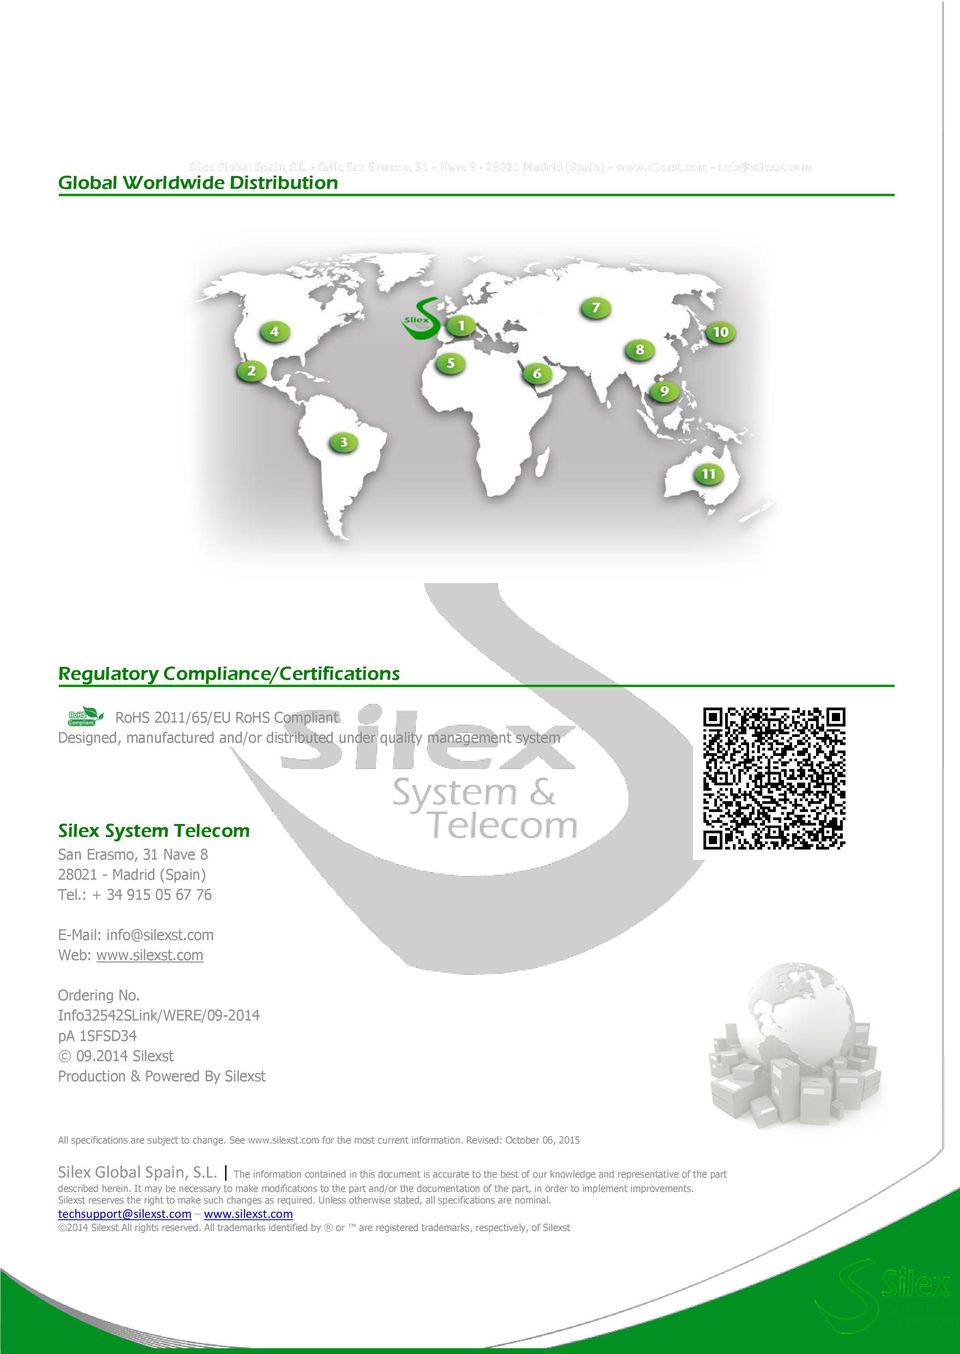 2014 Silexst Production & Powered By Silexst All specifications are subject to change. See www.silexst.com for the most current information. Revised: October 06, 2015 Silex Global Spain, S.L.